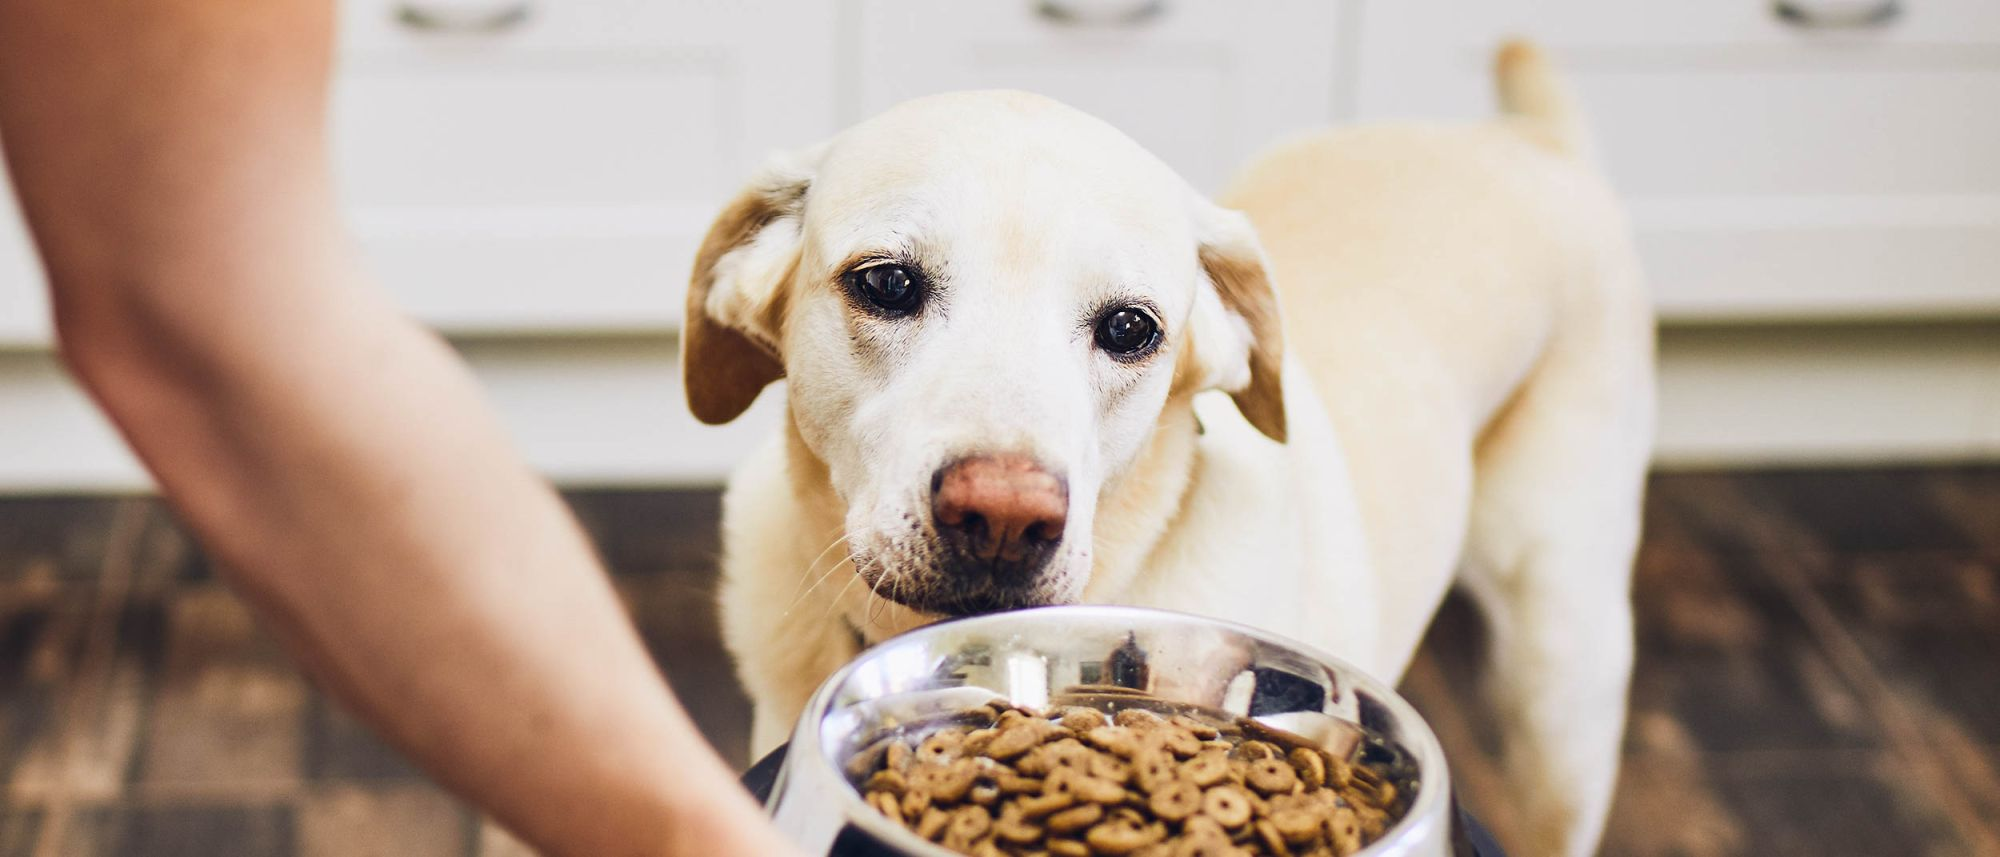 Labrador Retriever adult in a kitchen looking at a bowl of food